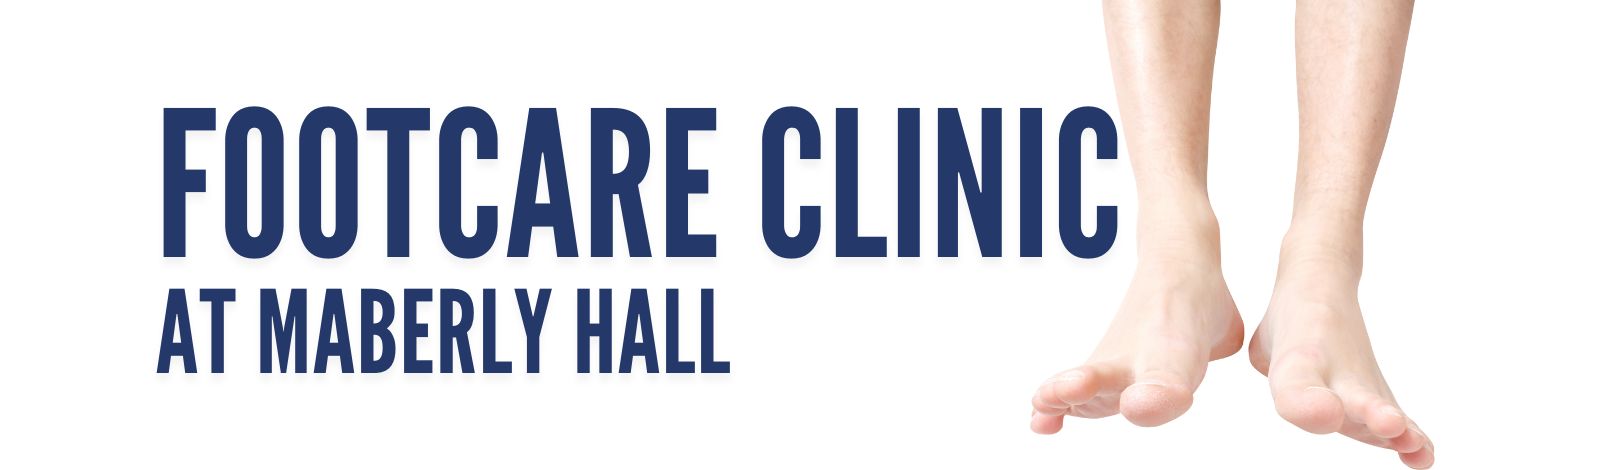 Footcare Clinic Banner